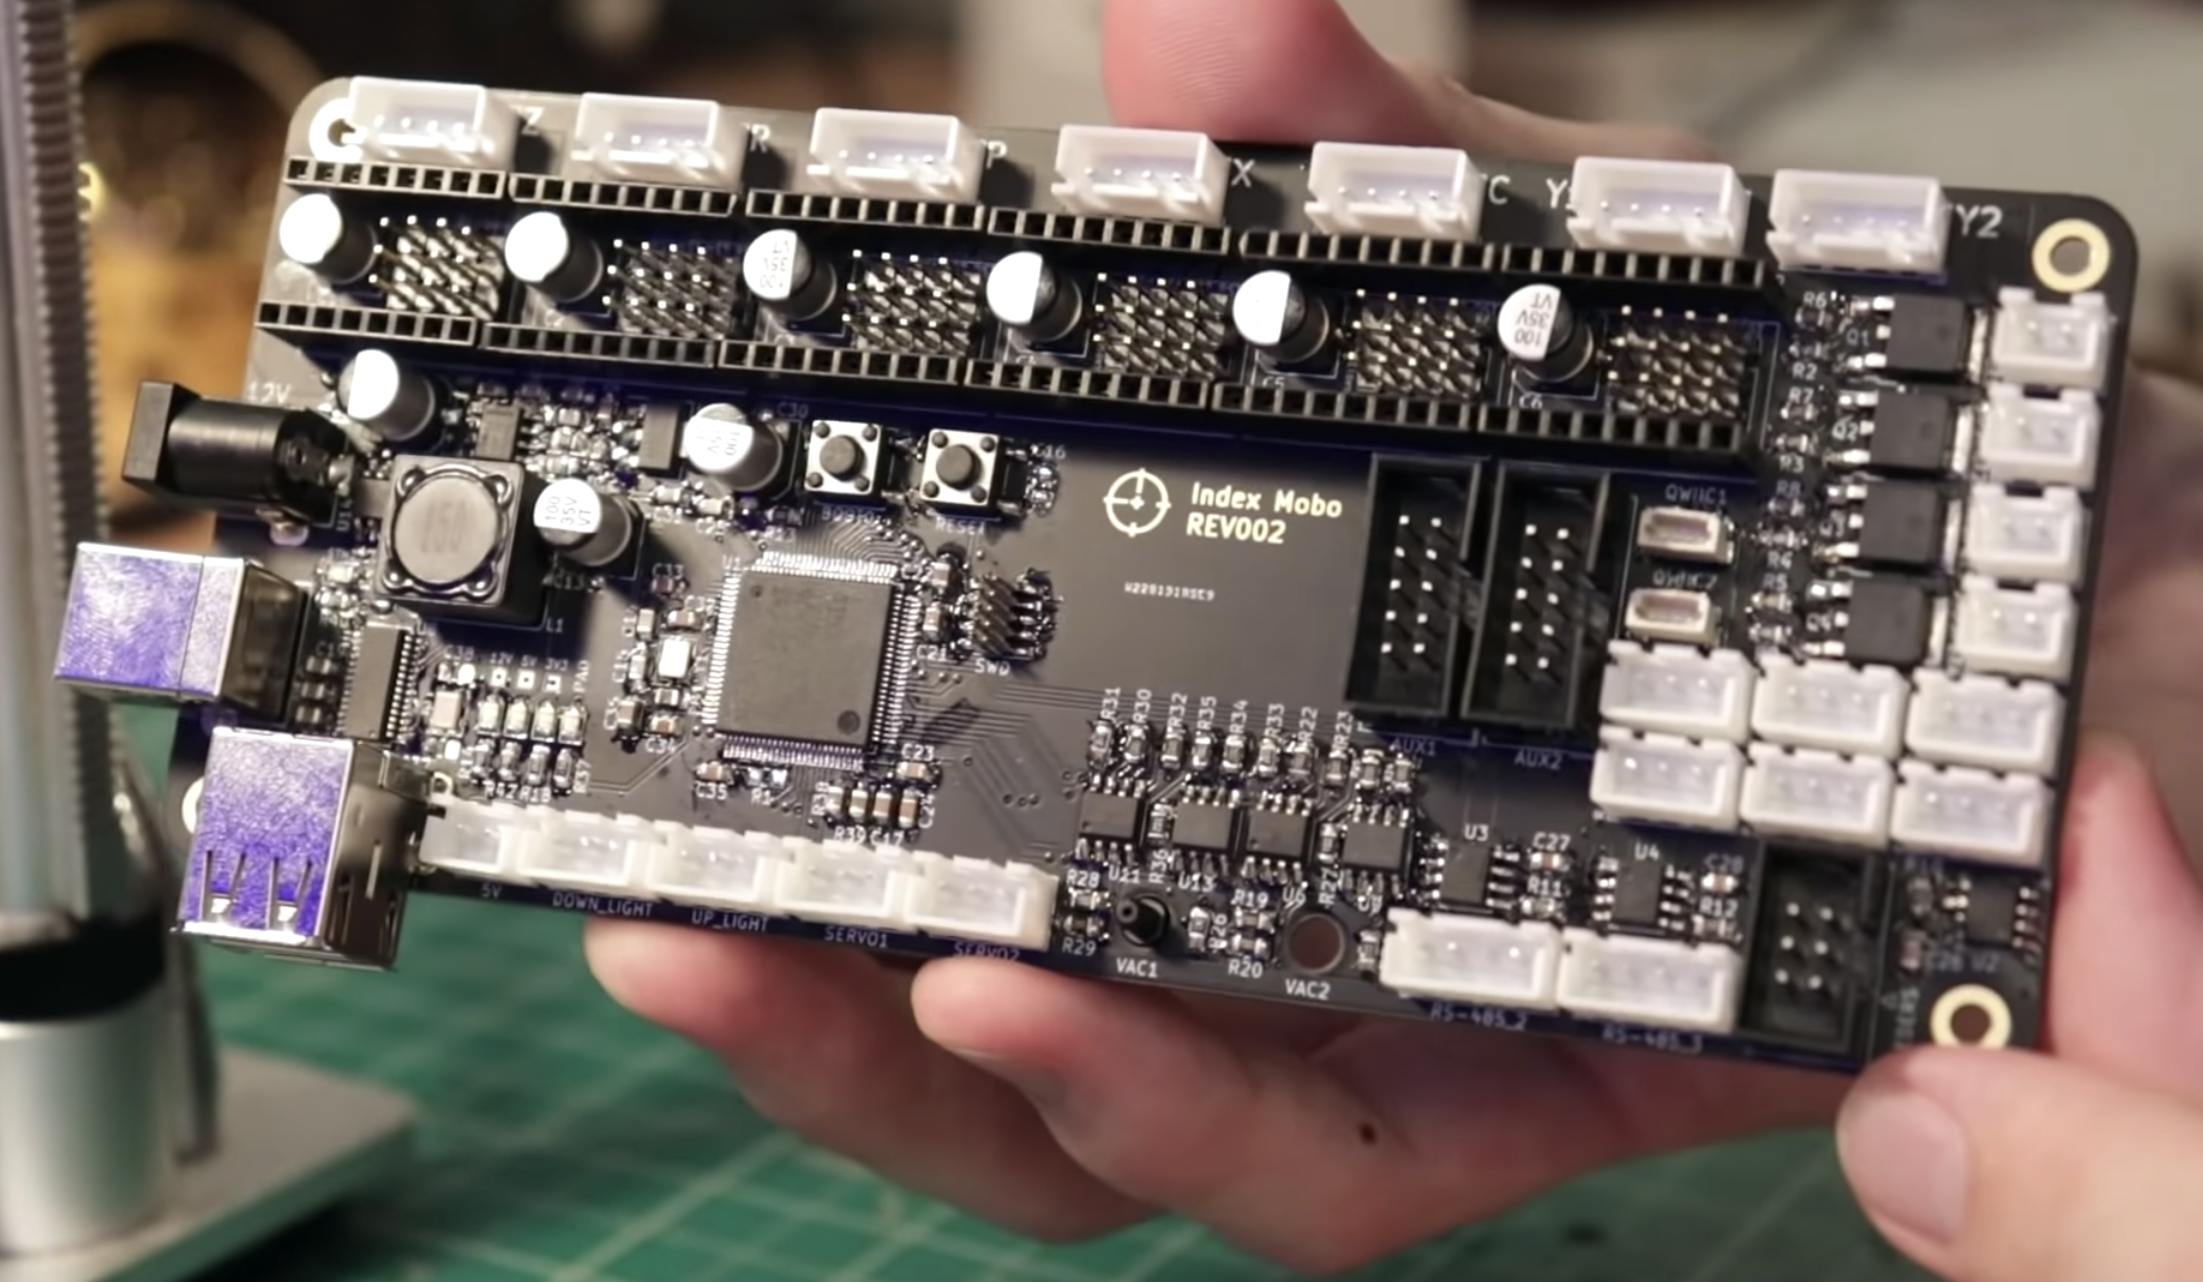 Stephen Hawes Completes Motherboard for the Index PnP Machine - Hackster.io